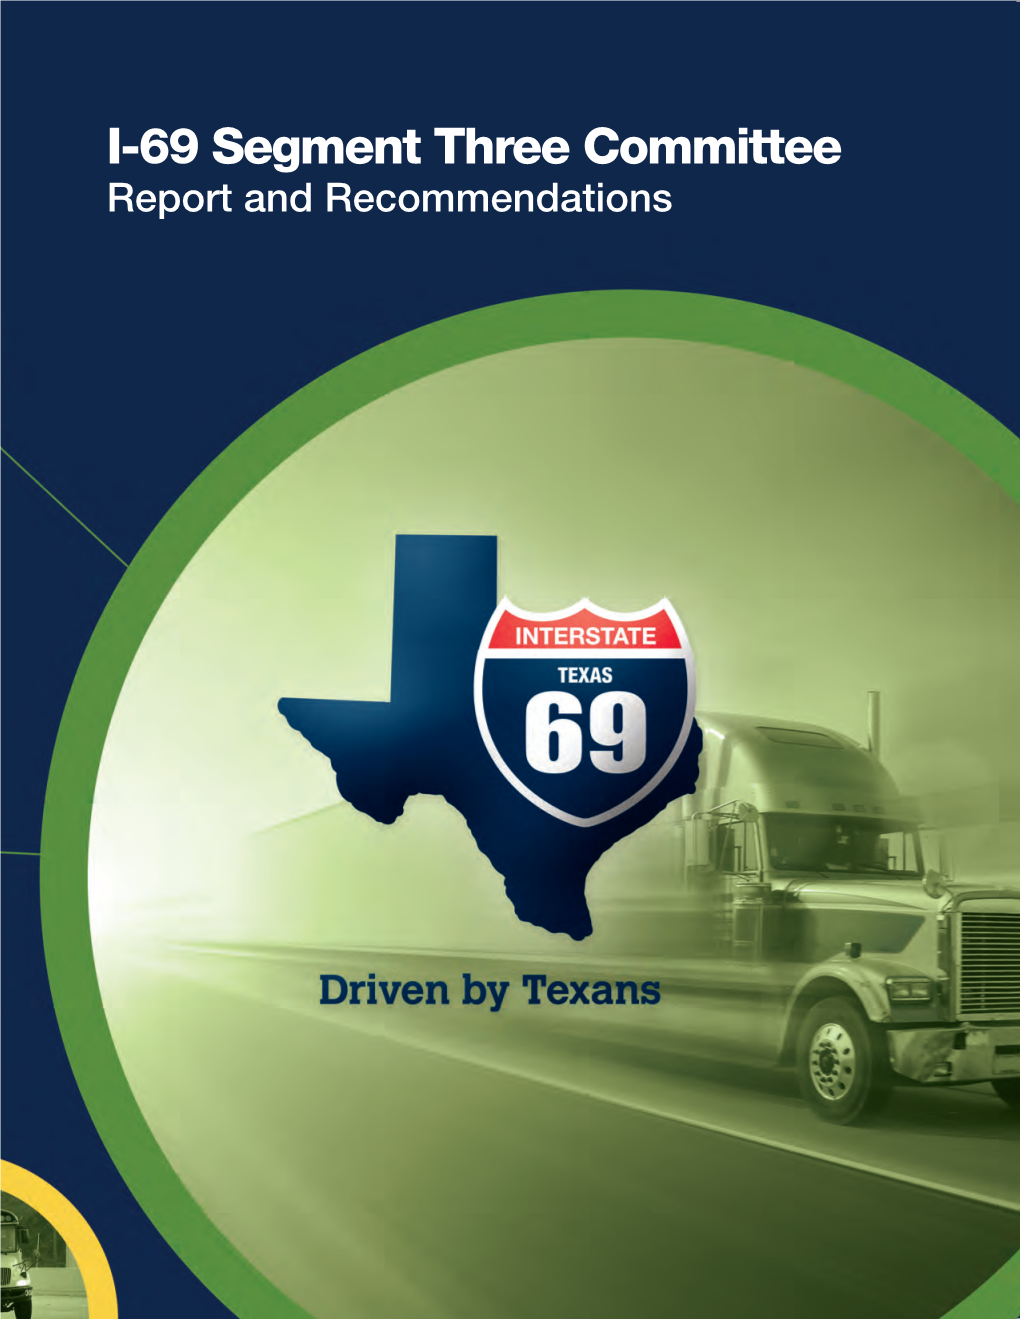 I-69 Segment Three Committee Report and Recommendations